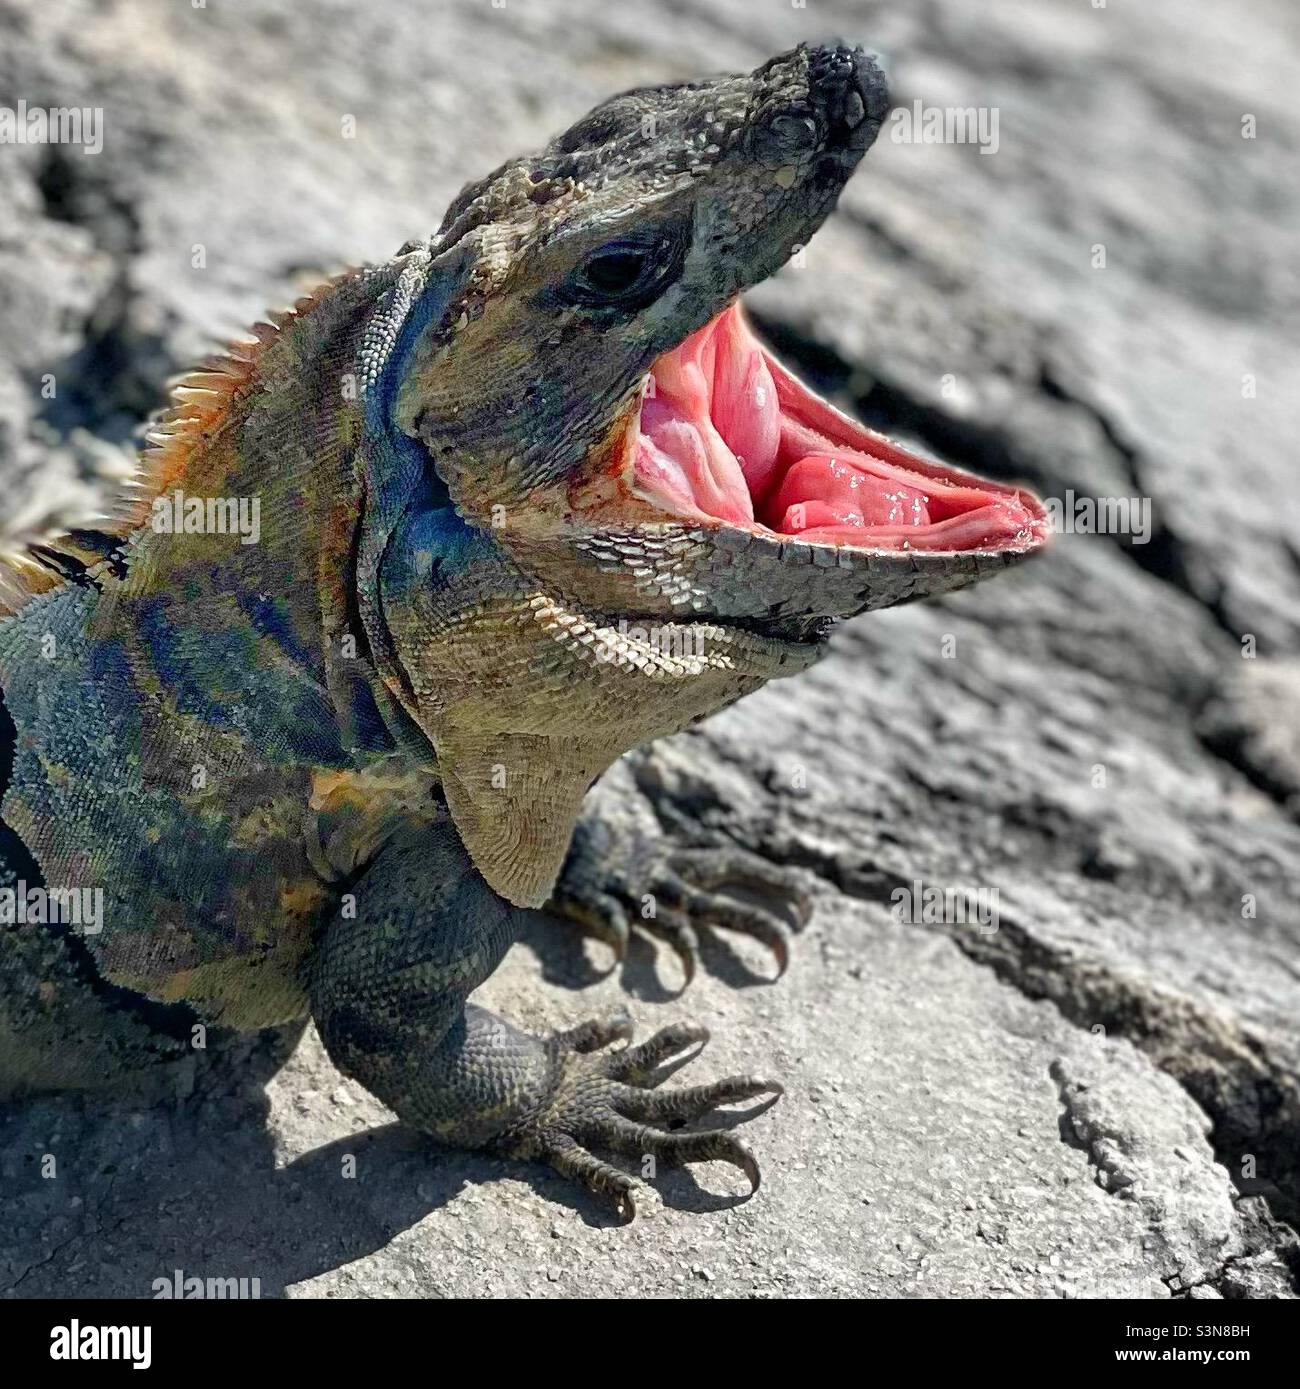 Iguana with mouth wide open. Stock Photo